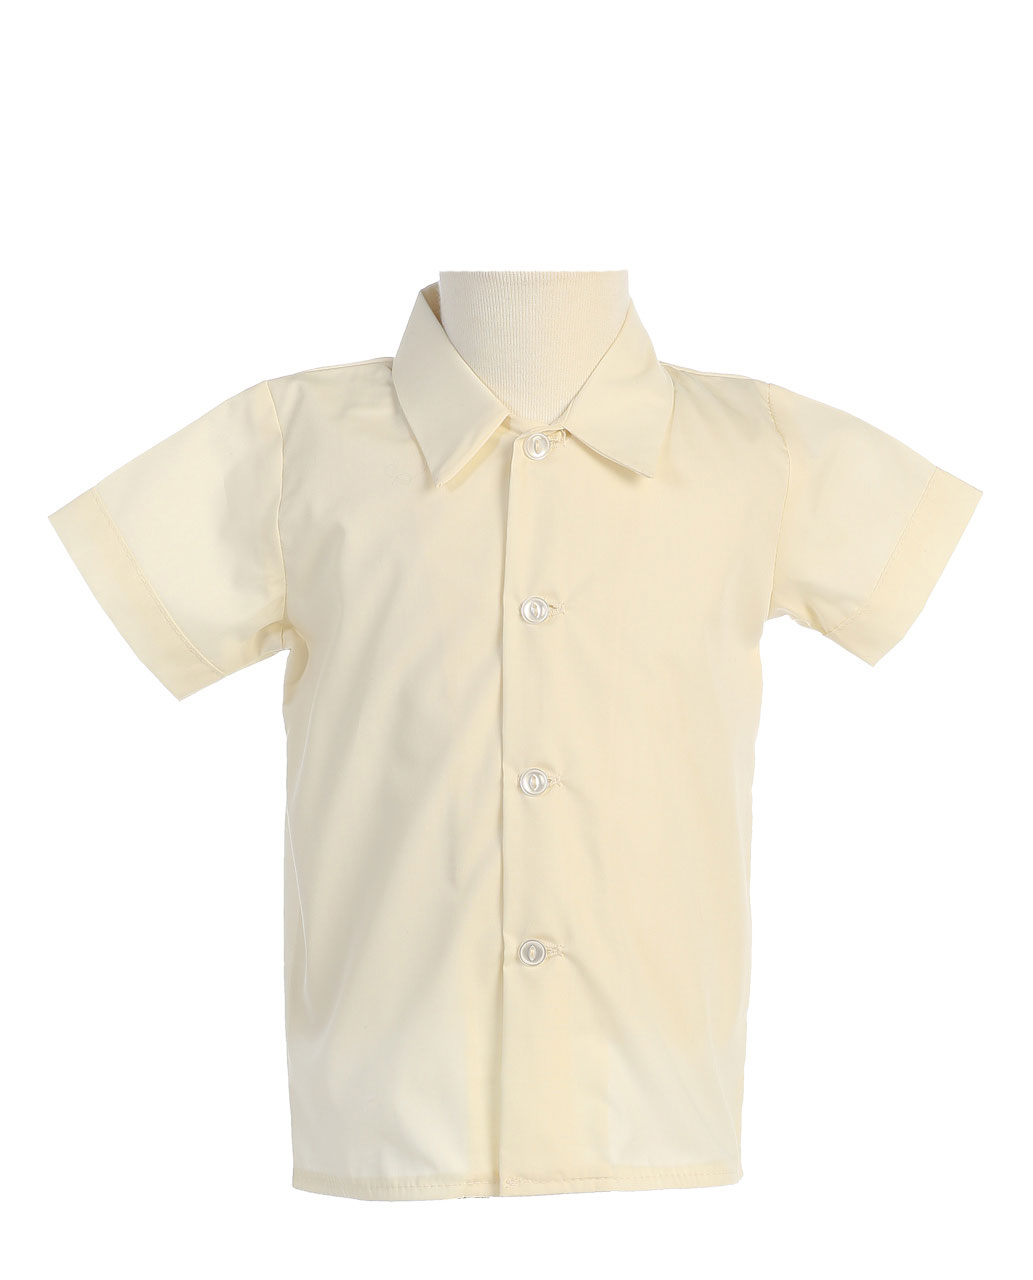 Boys Short Sleeved Simple Dress Shirt - Available in Ivory 3T